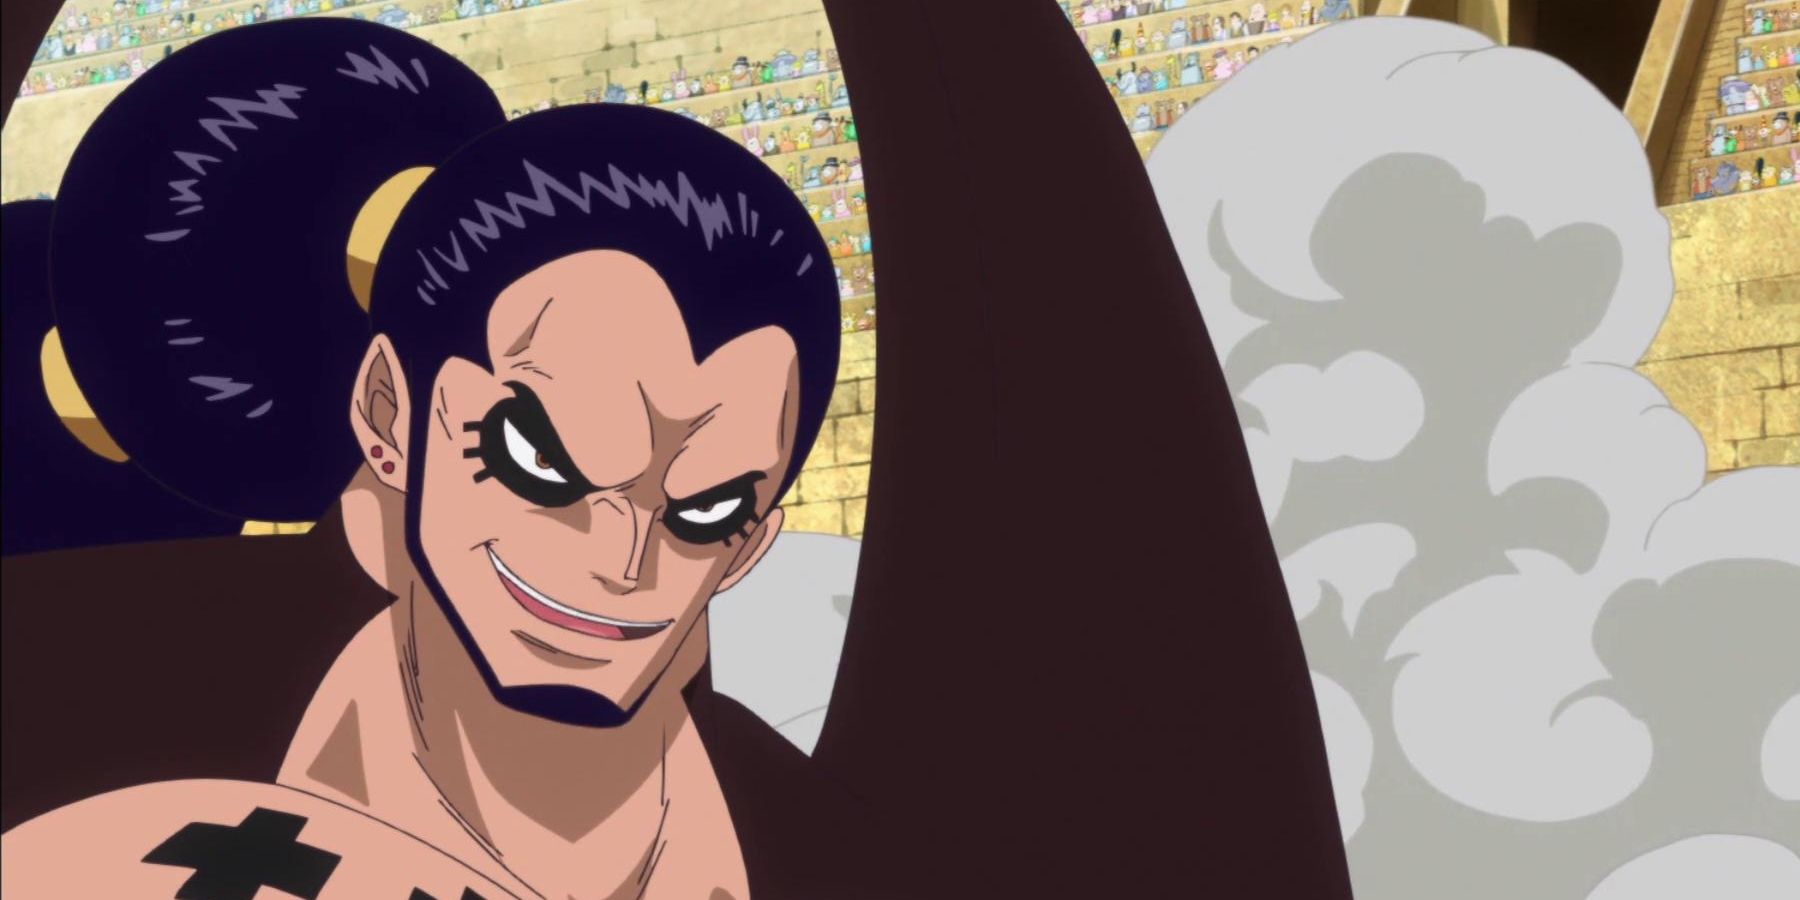 Ideo from One Piece